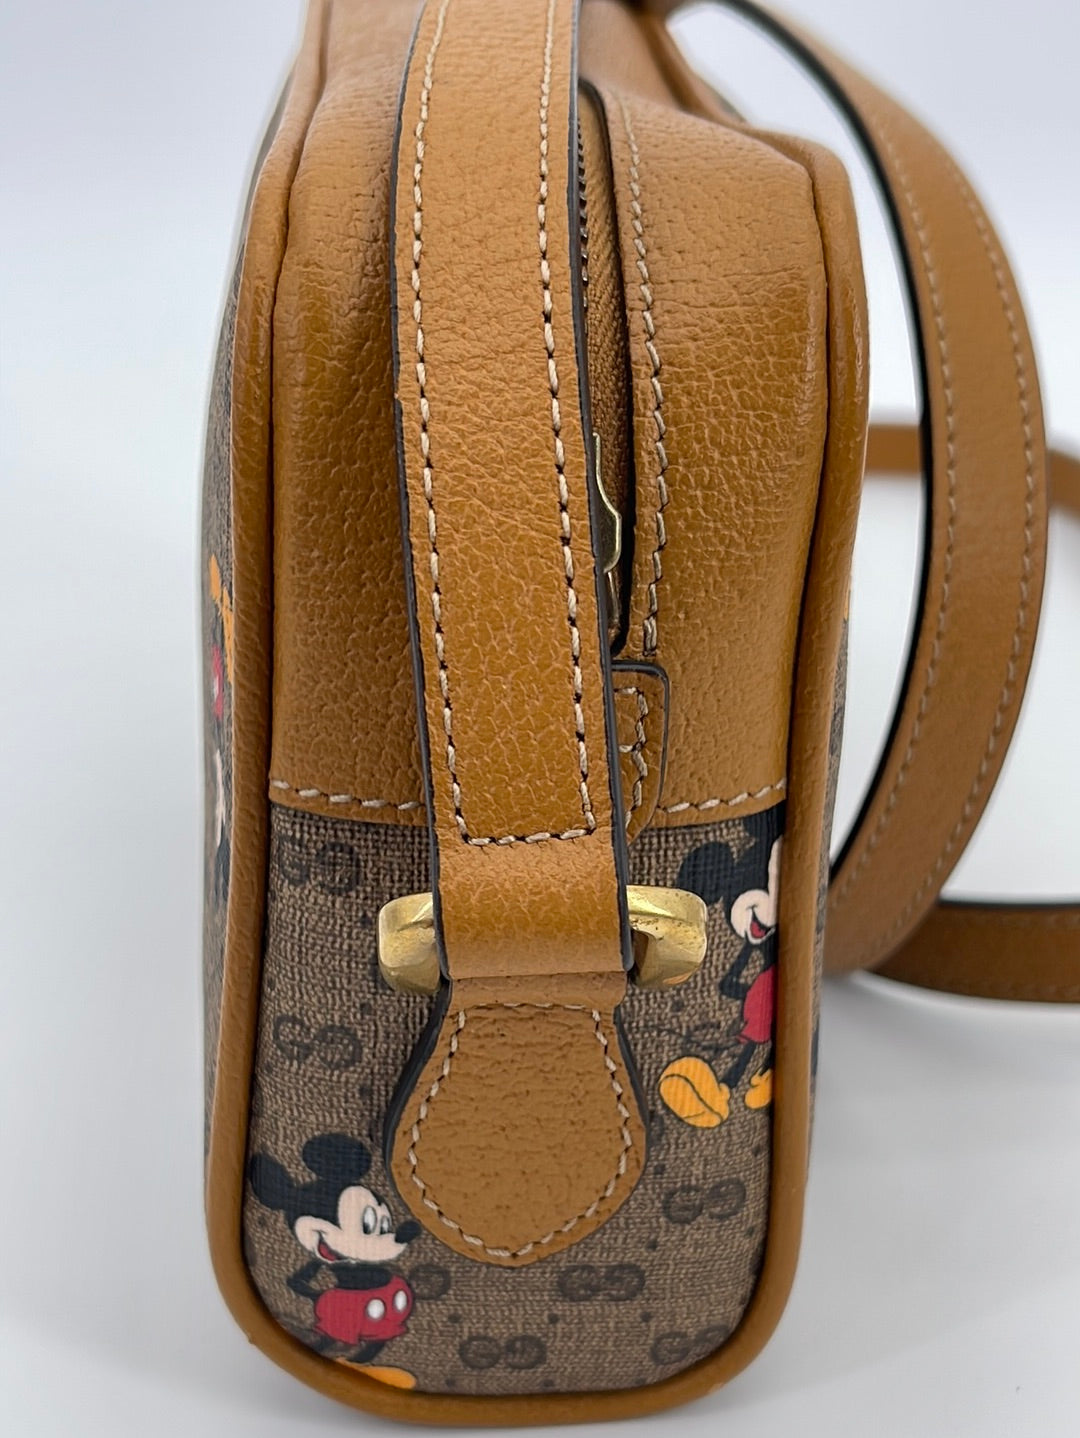 Gucci x Disney Mickey Mouse Brown GG Canvas Round Mini Backpack Bag 603730  8559